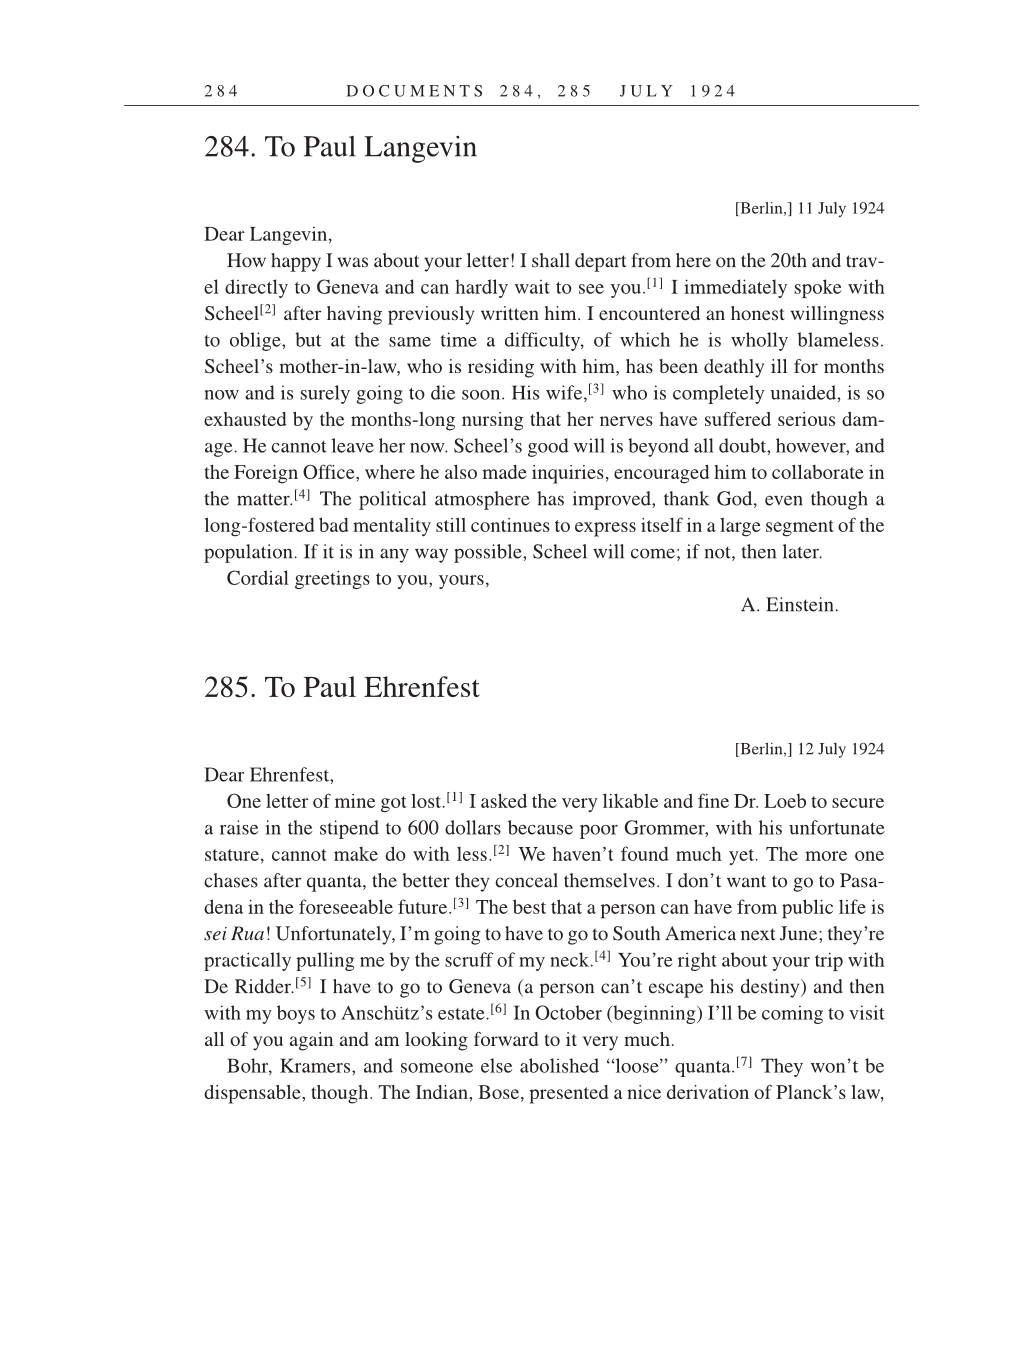 Volume 14: The Berlin Years: Writings & Correspondence, April 1923-May 1925 (English Translation Supplement) page 284